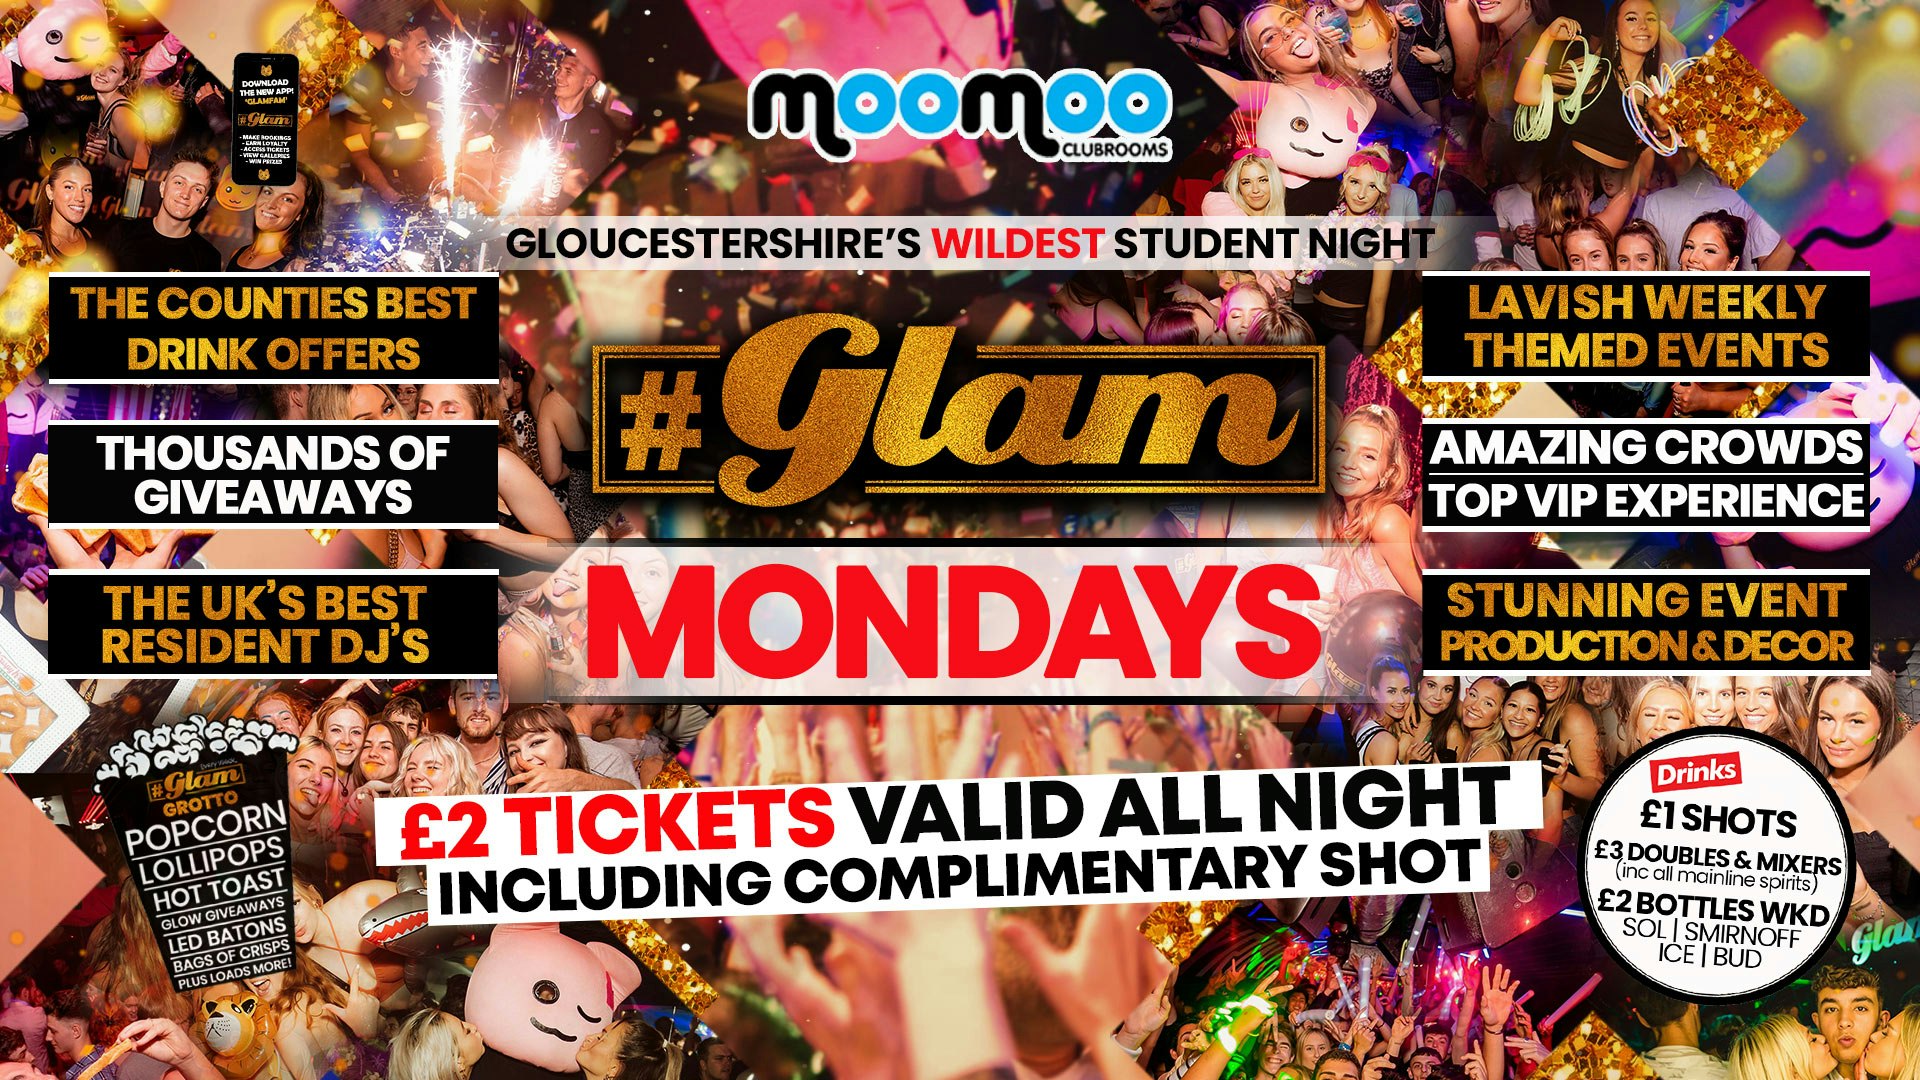 Glam – £2 TICKETS WITH SHOT VALID ALL NIGHT! 🐾Gloucestershire’s Biggest Monday Night 😻